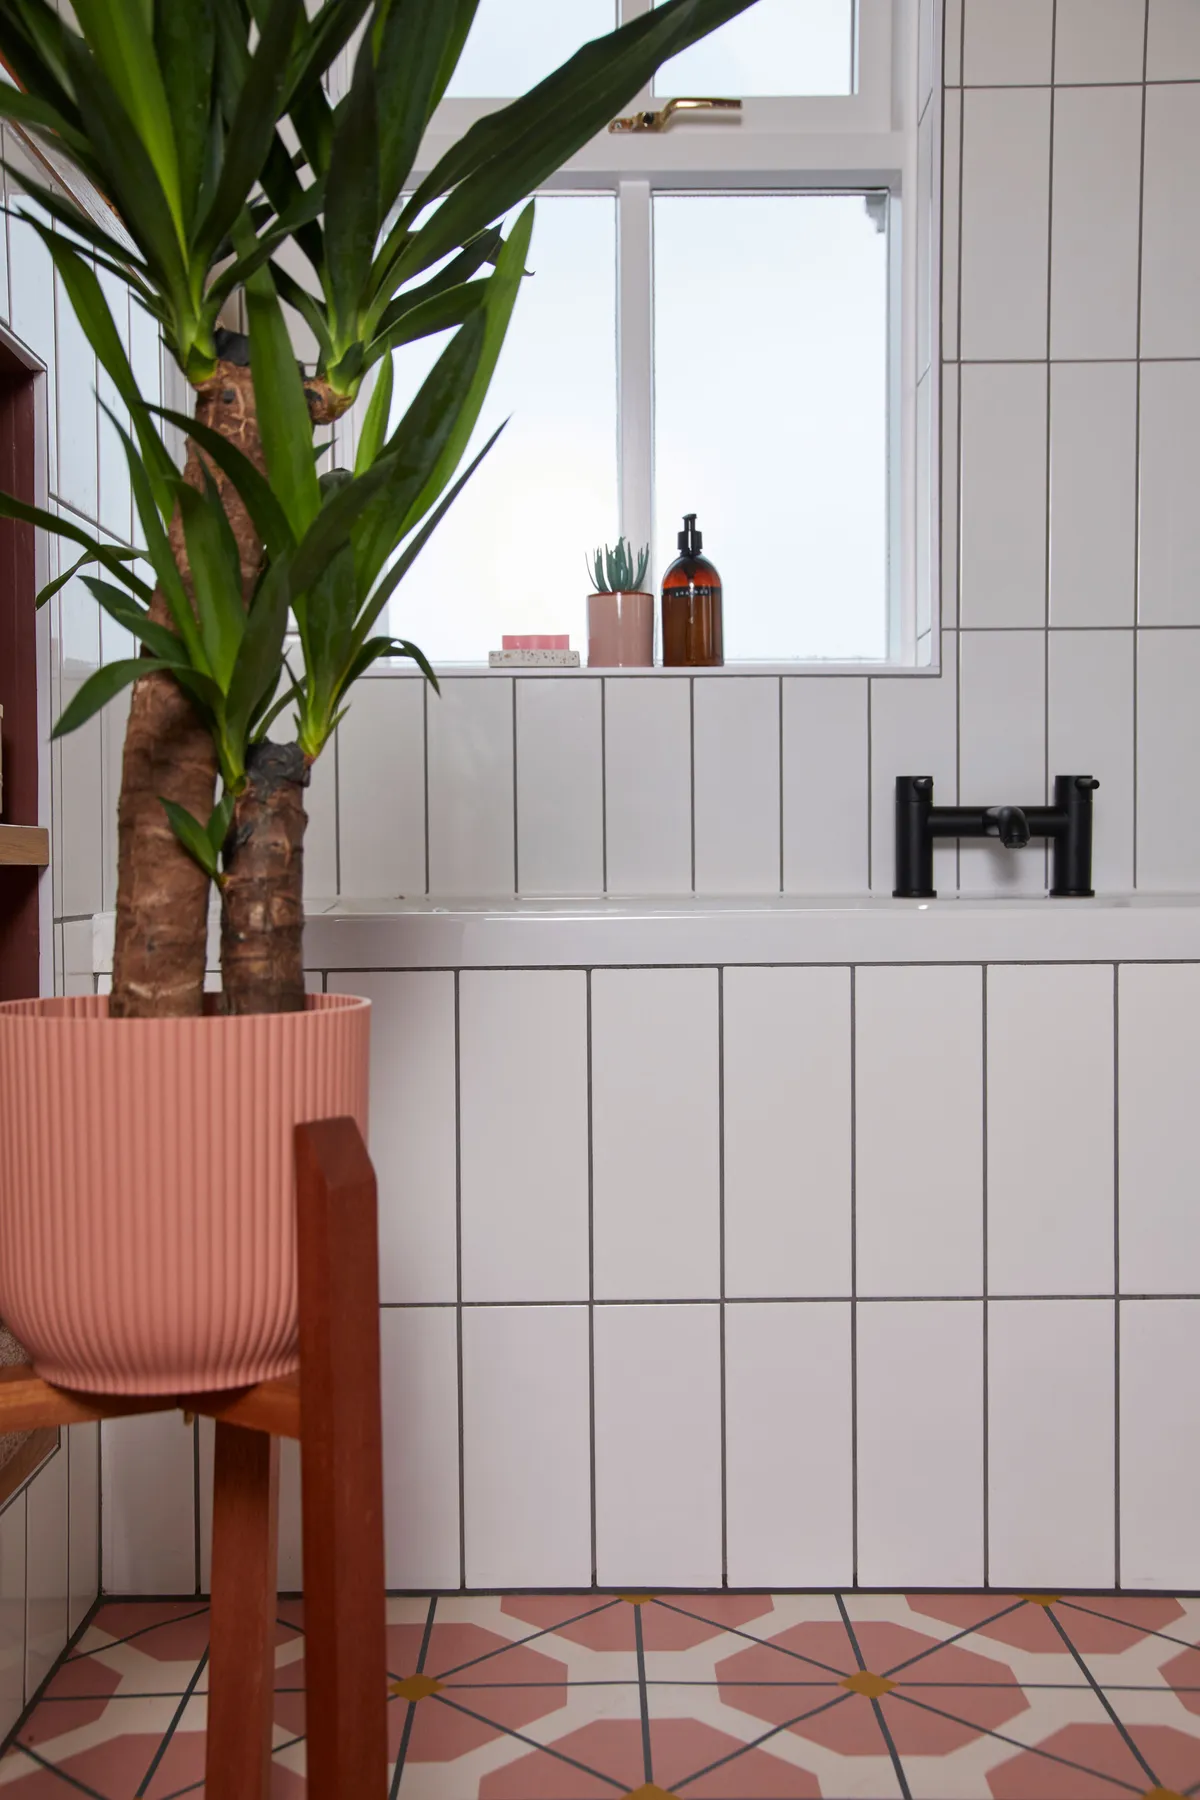 Bathroom makeover: 'It's small in size but big on ideas'